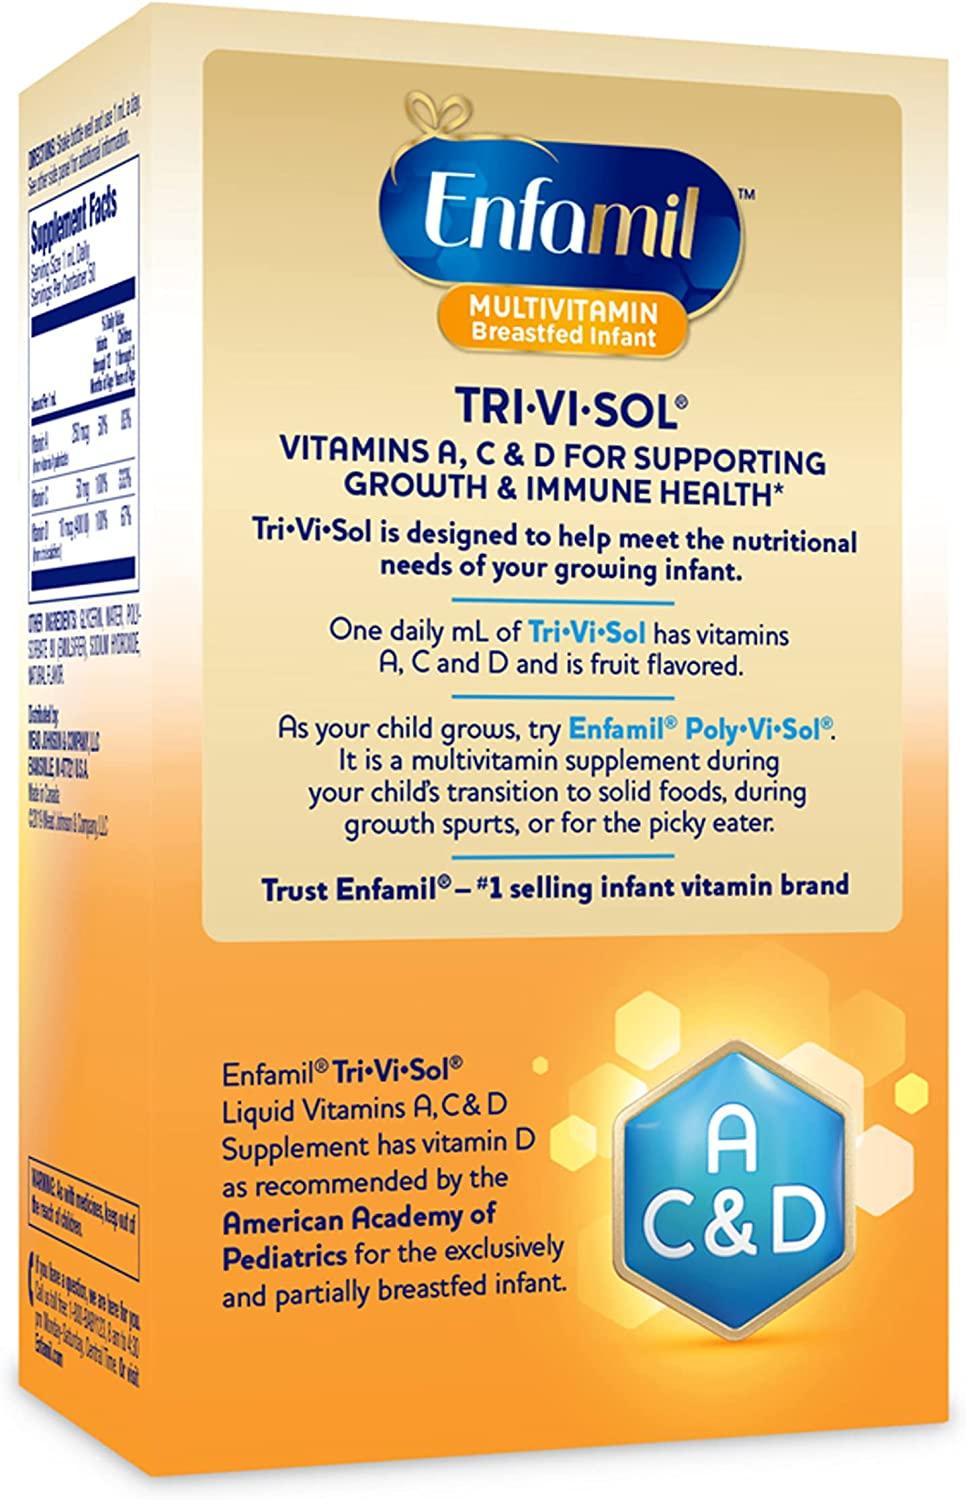 Voluntary cabin pace Enfamil Tri-Vi-Sol Vitamin A C & D Multi-Vitamin Drops for Infants Supports  Growth & Immune Health 50 mL Dropper Bottle